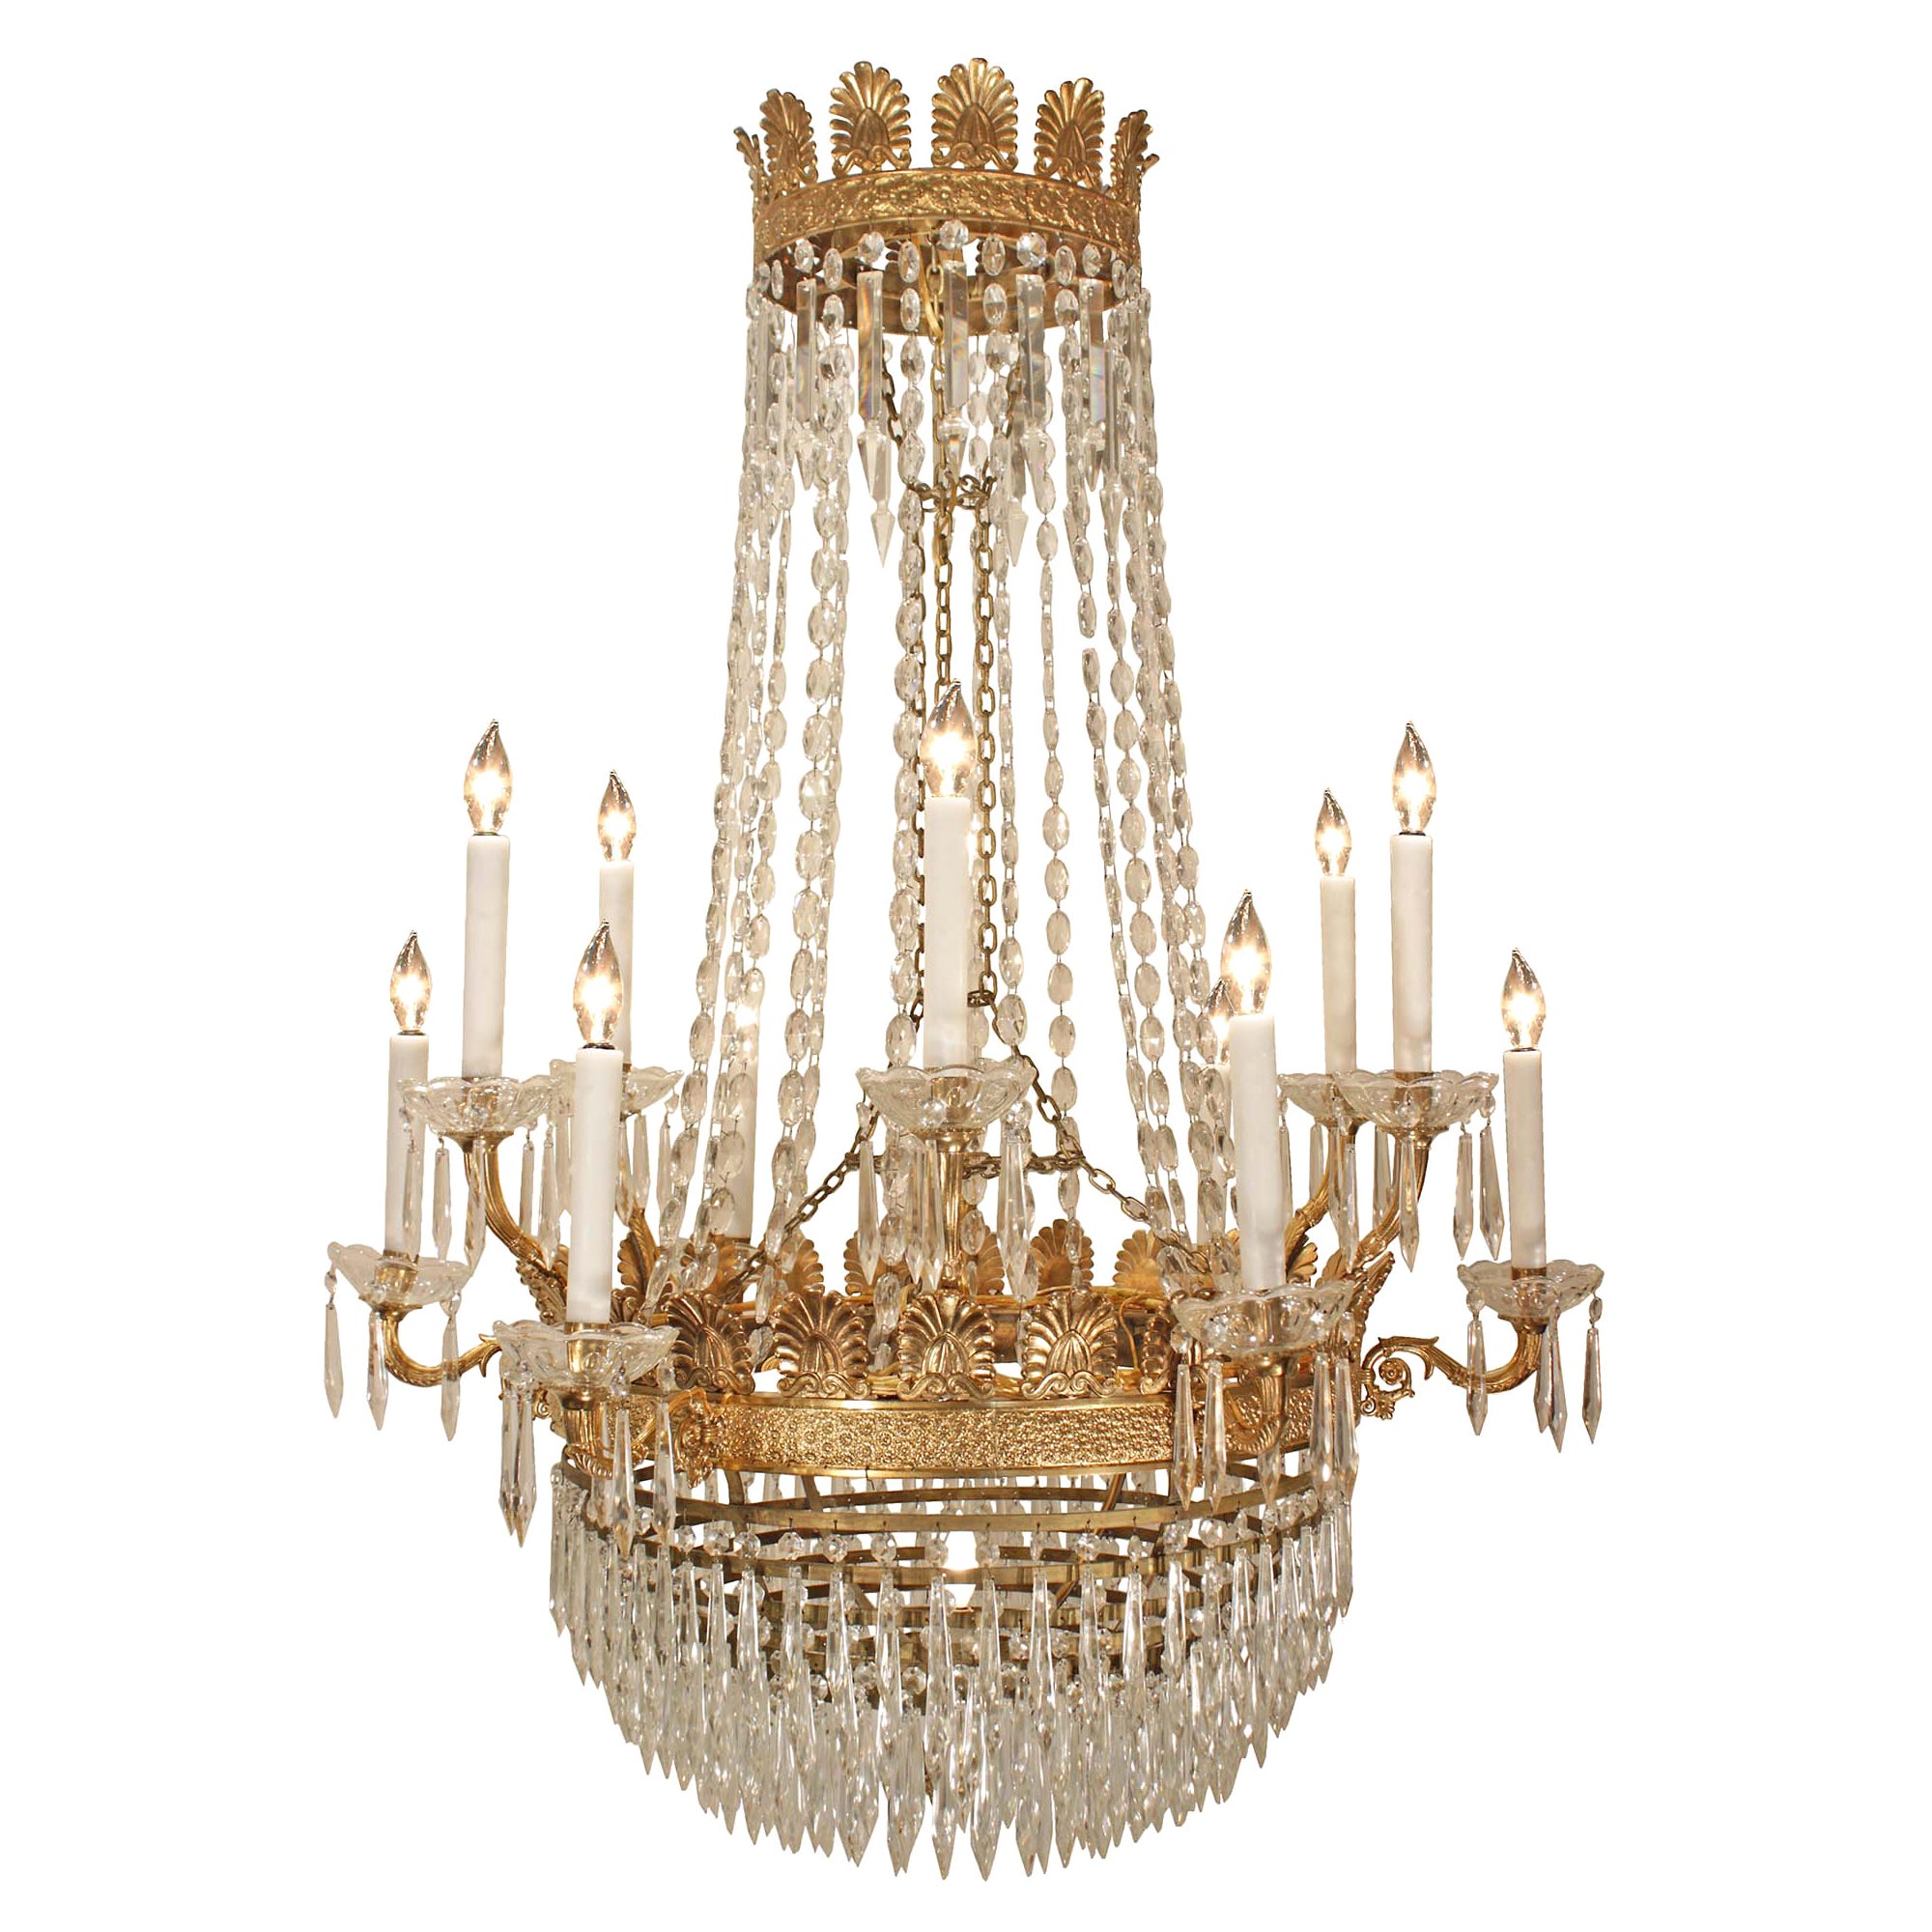 French 19th Century Neoclassical Style Crystal and Ormolu Chandelier